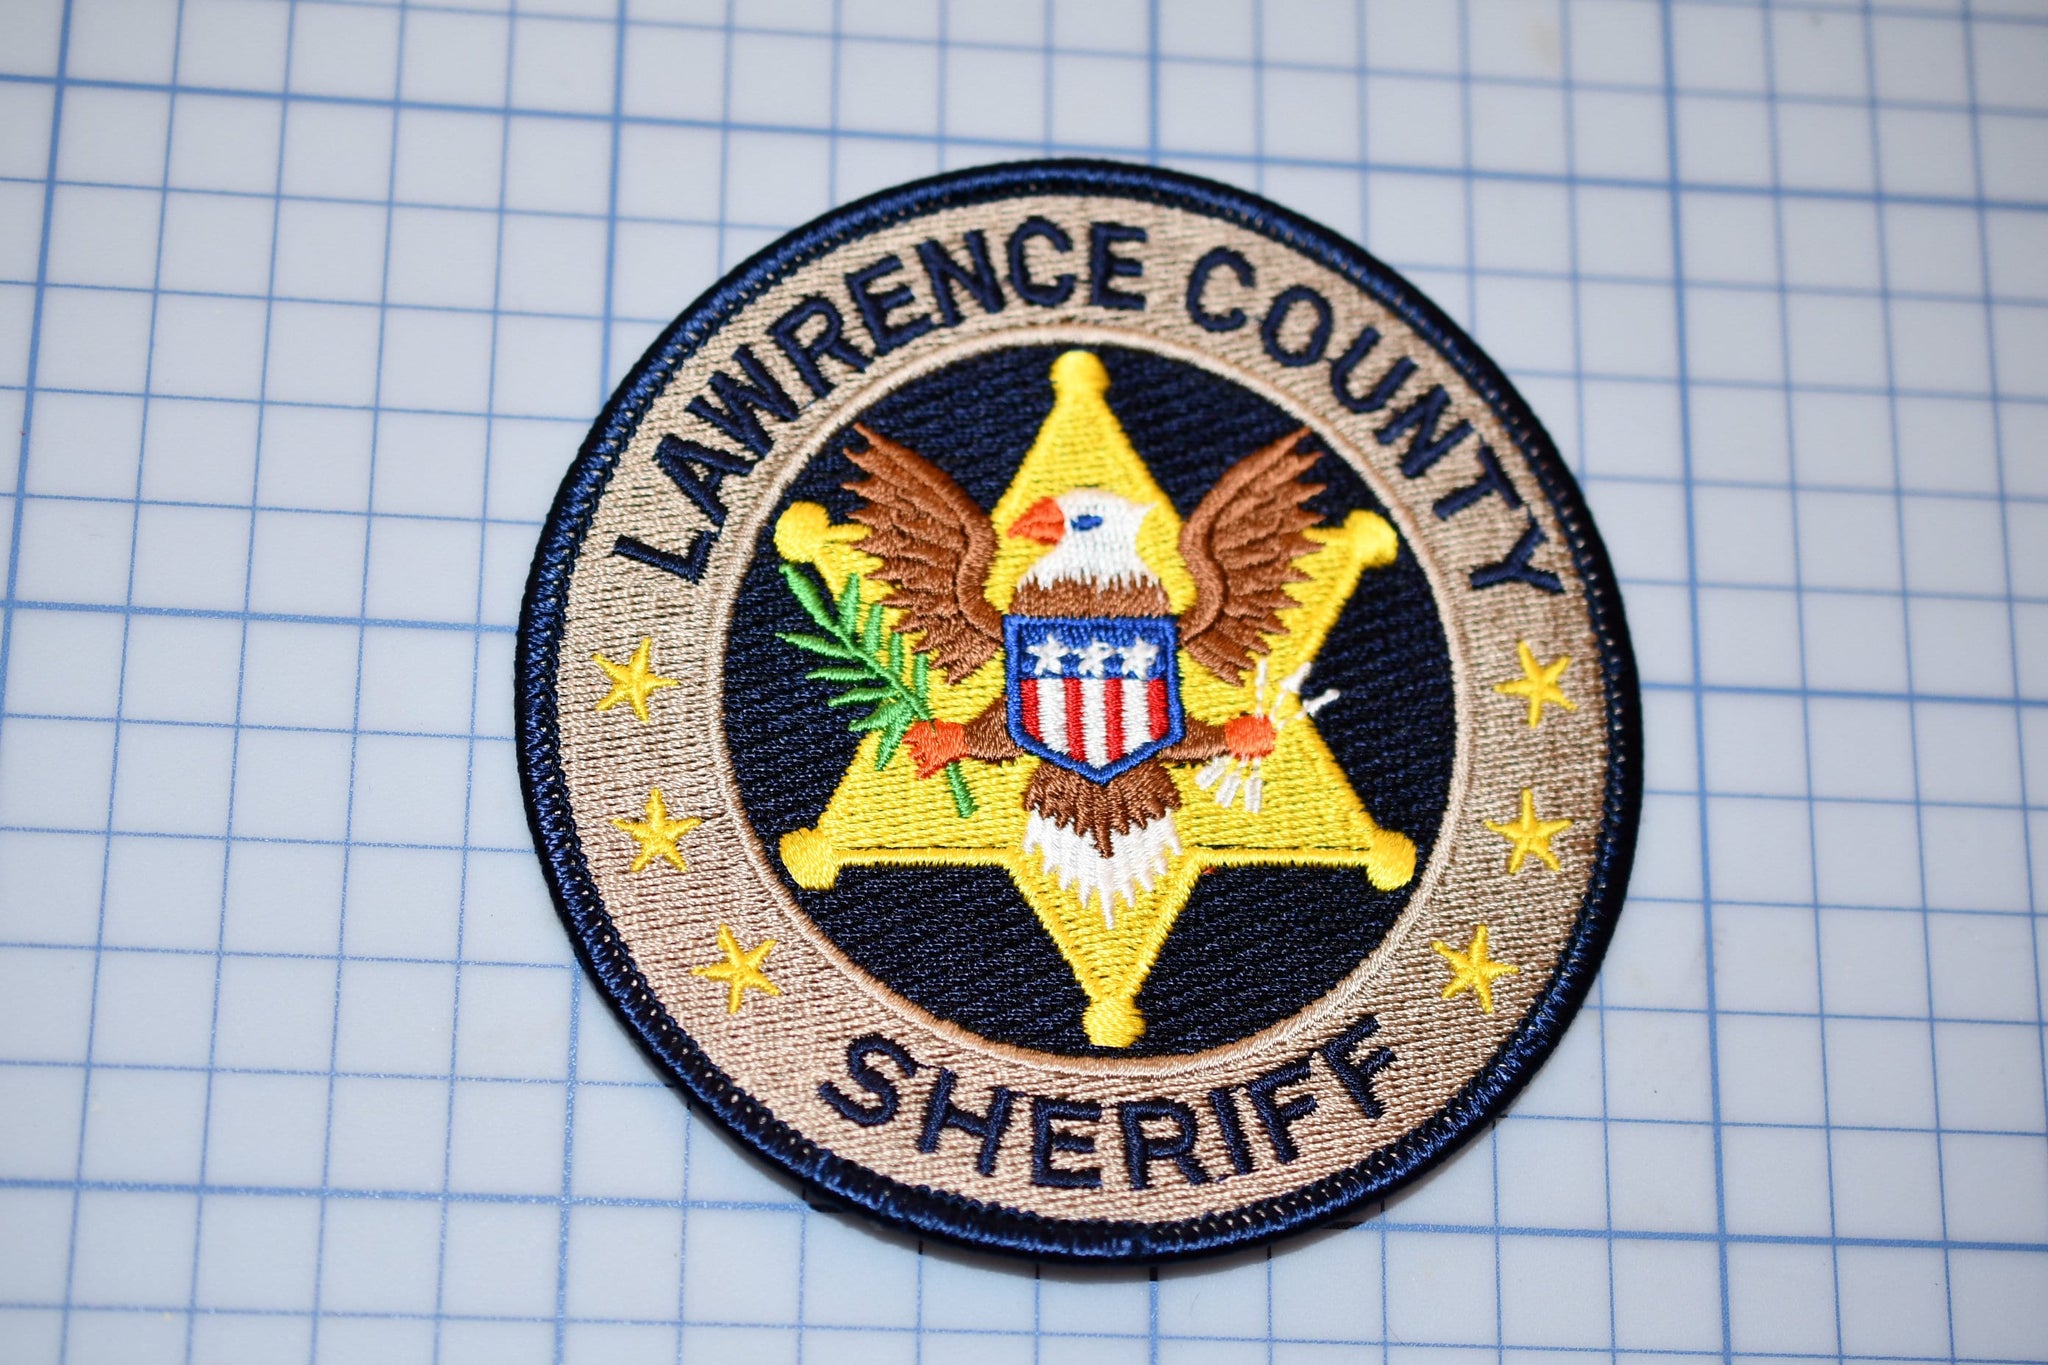 Lawrence County Mississippi Sheriff Patch (S3-252)